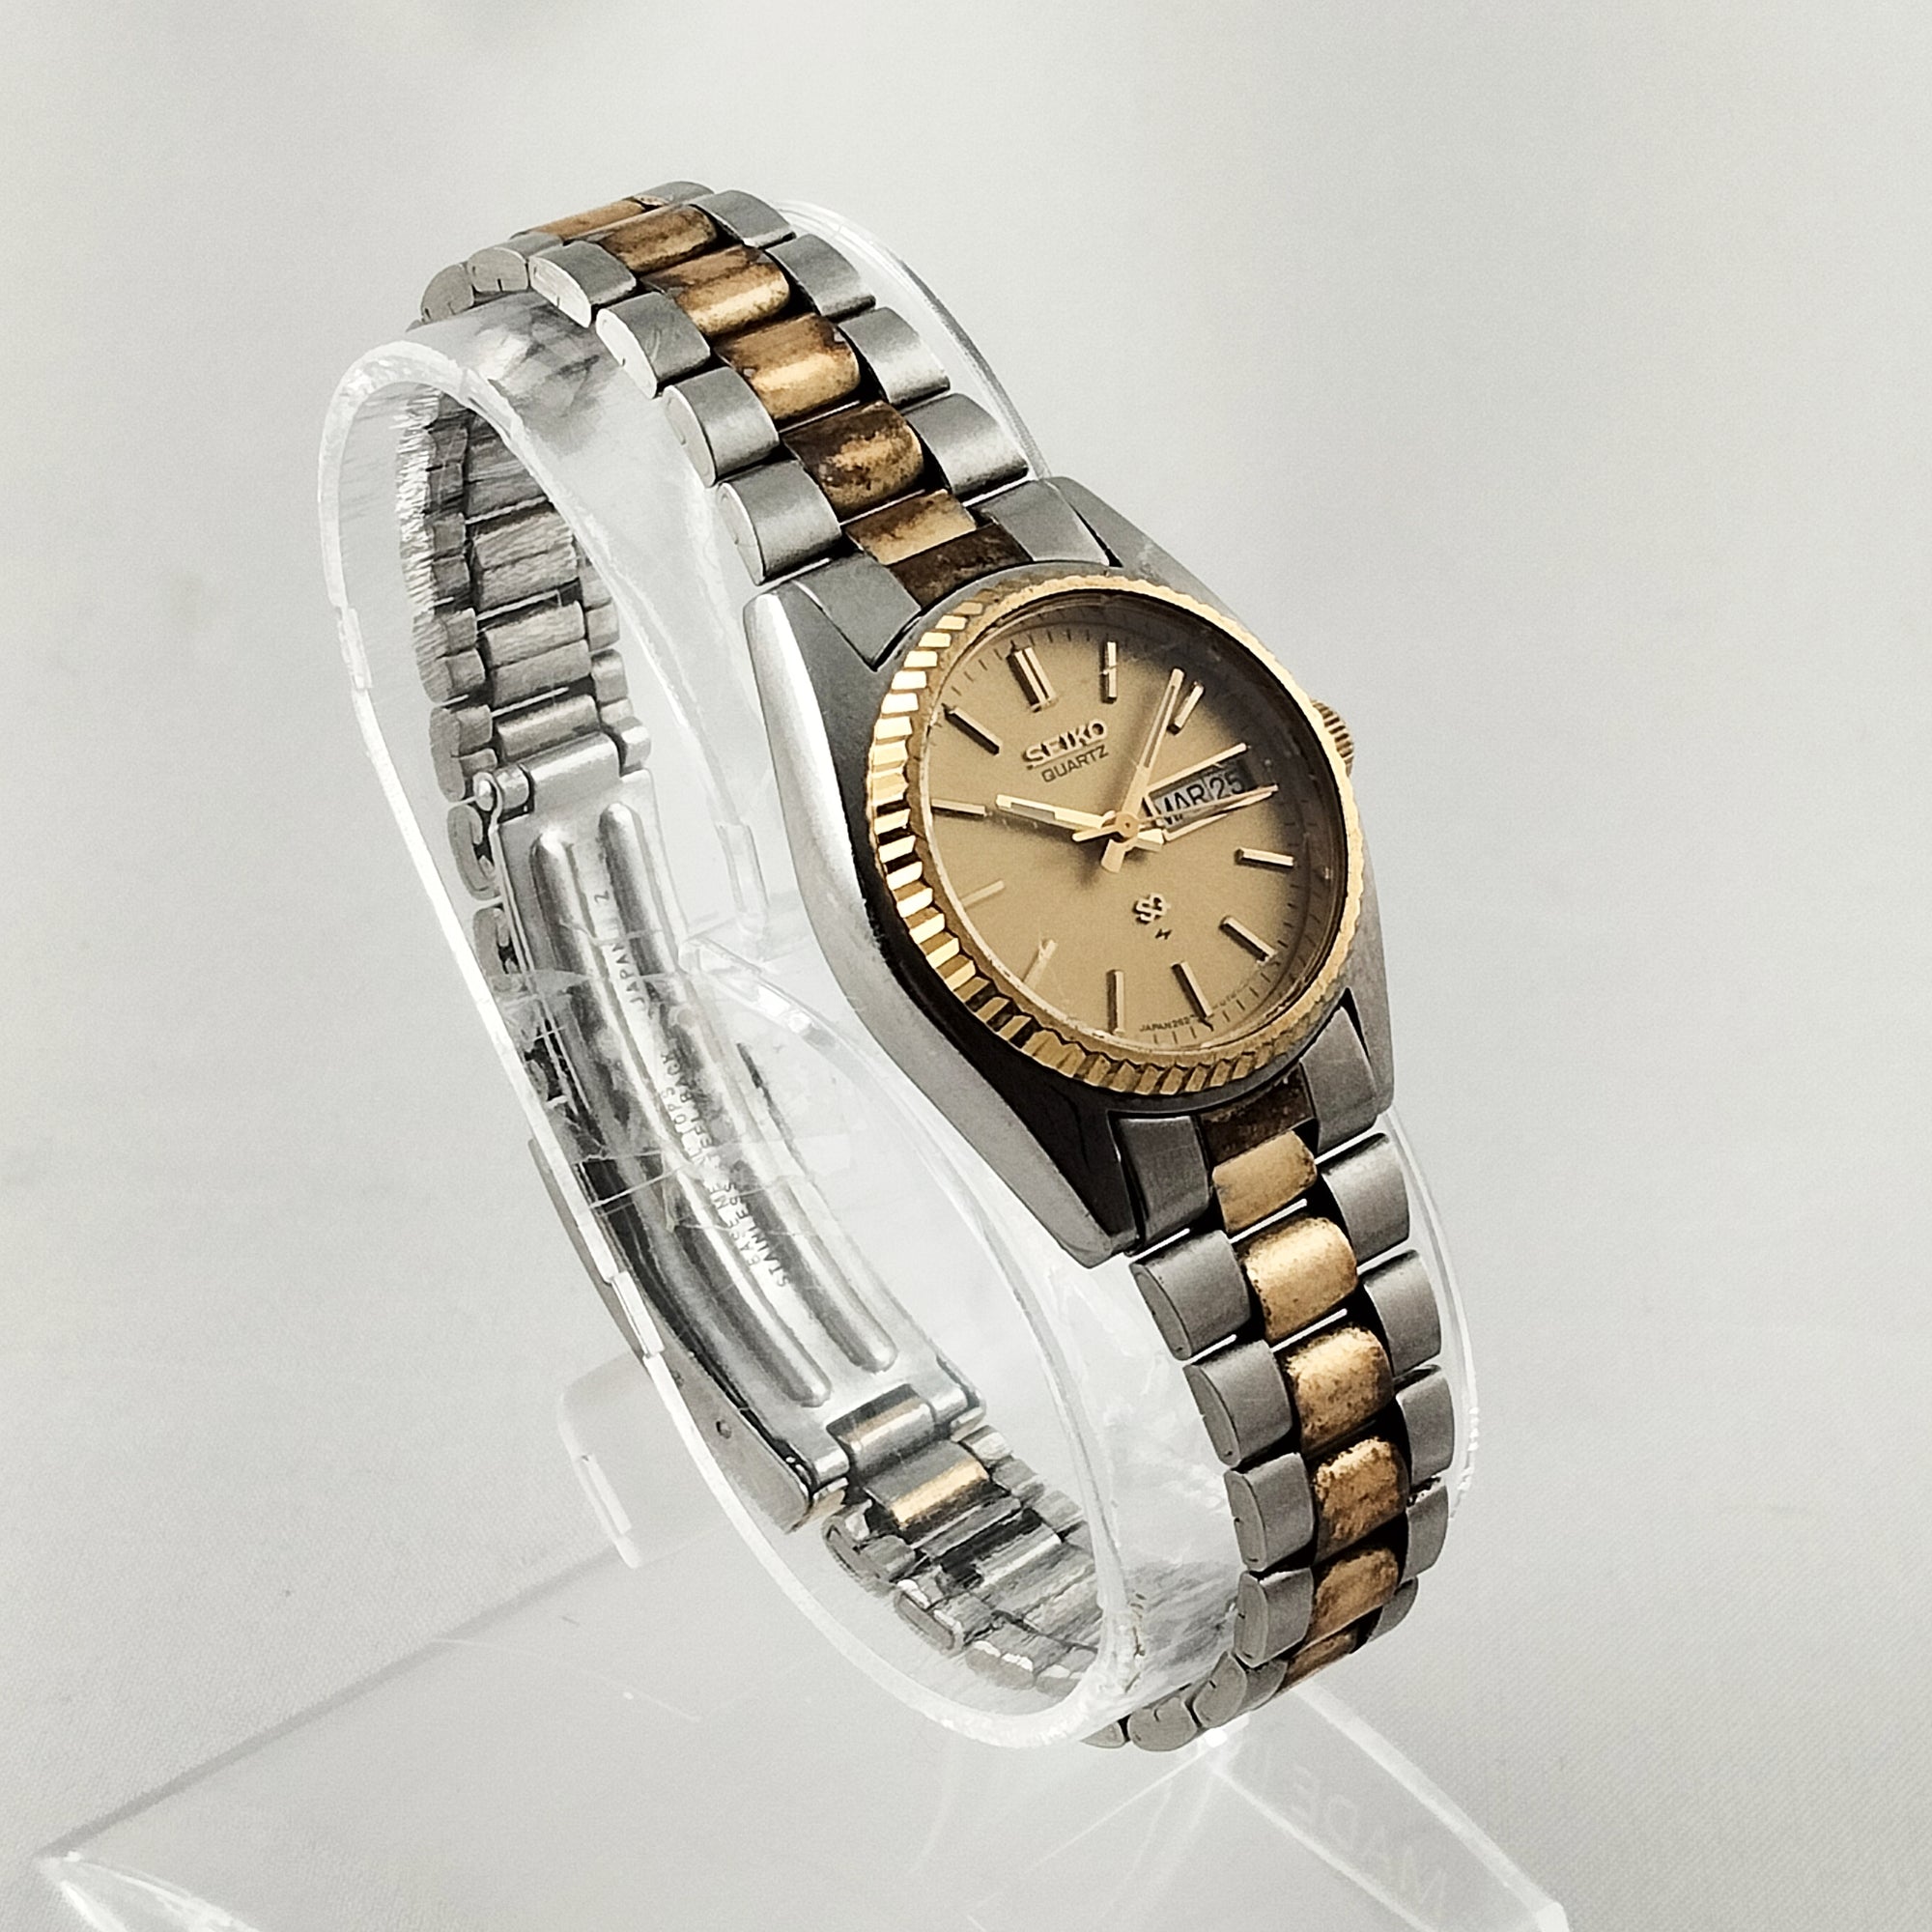 Seiko Unisex Silver and Gold Tone Watch, Gold Tone Dial, Bracelet Strap